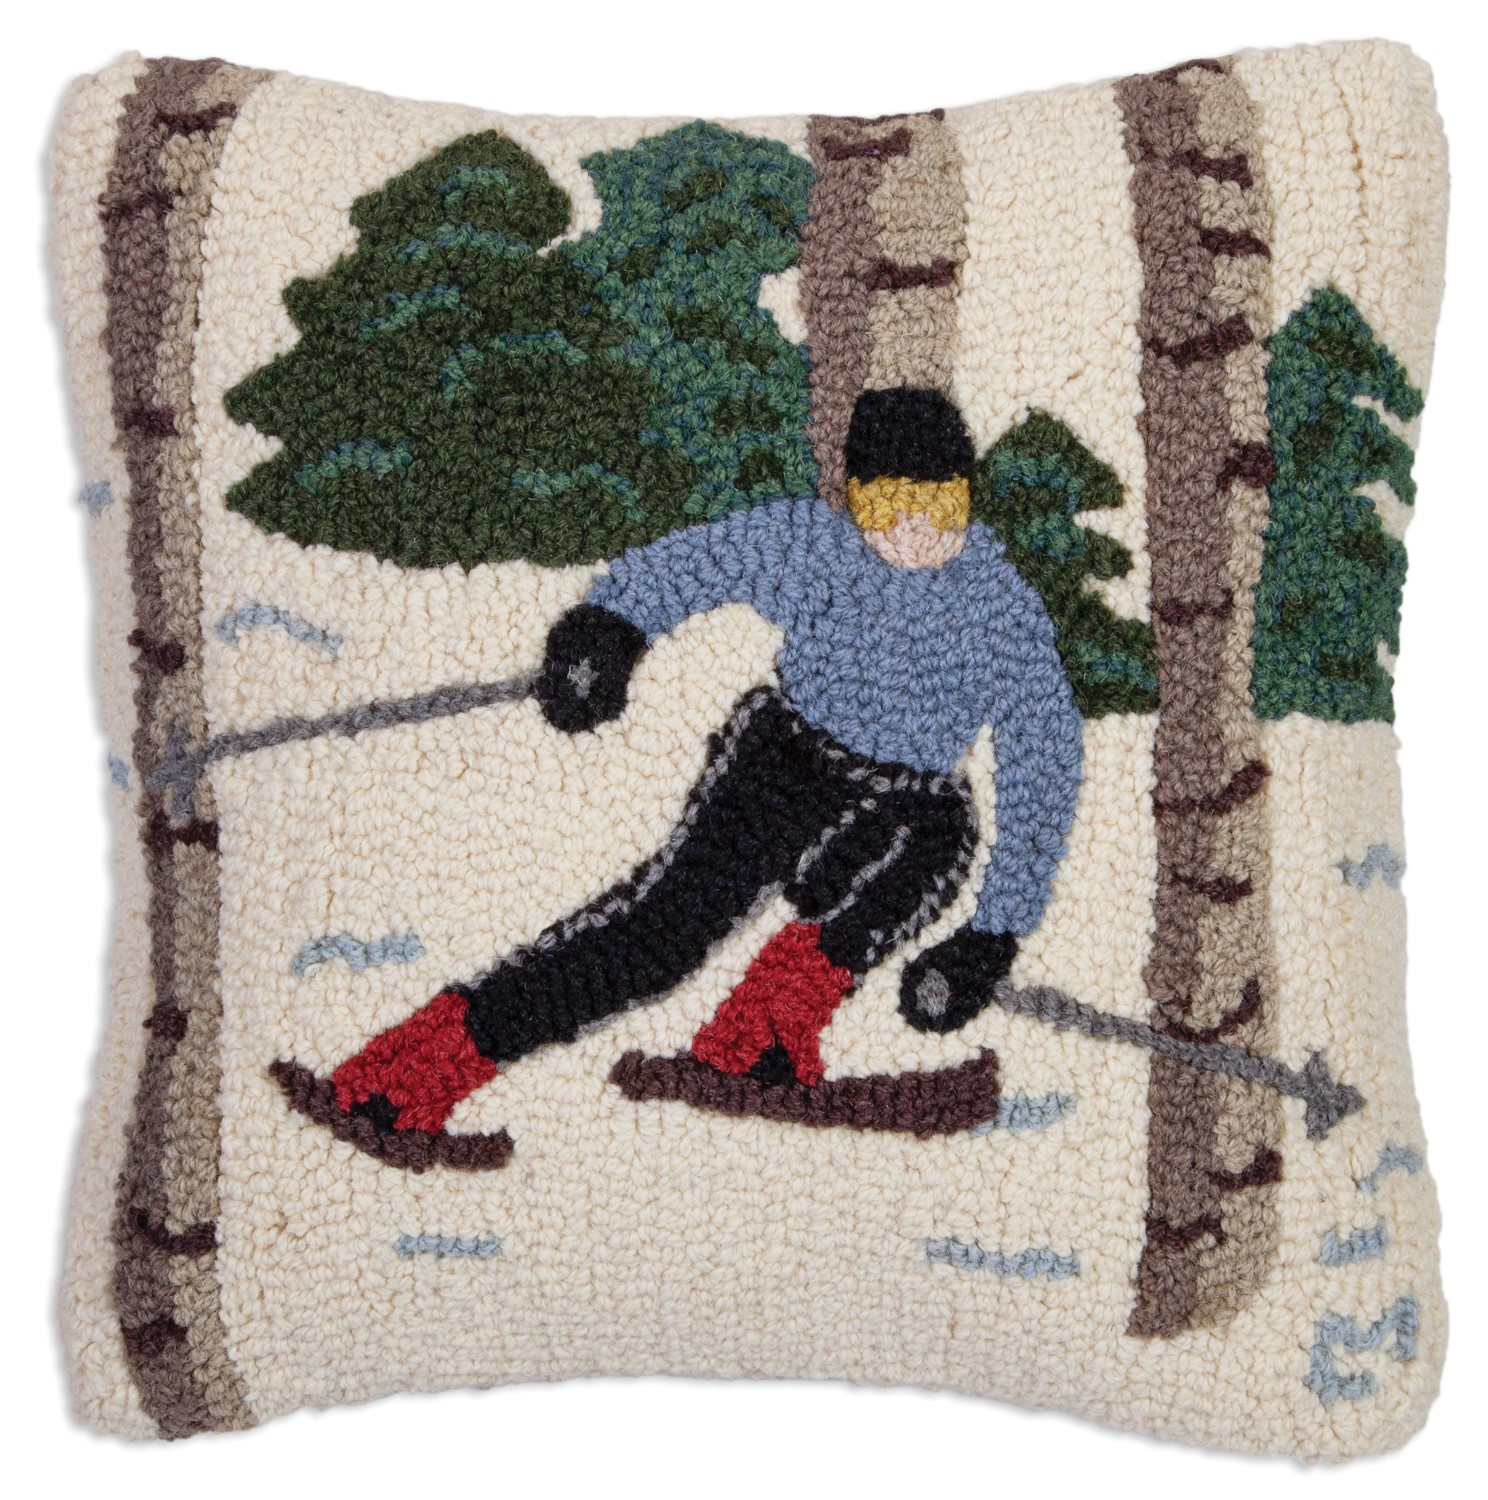 Blue Truck with Skis Hook Pillow - Ski Haus